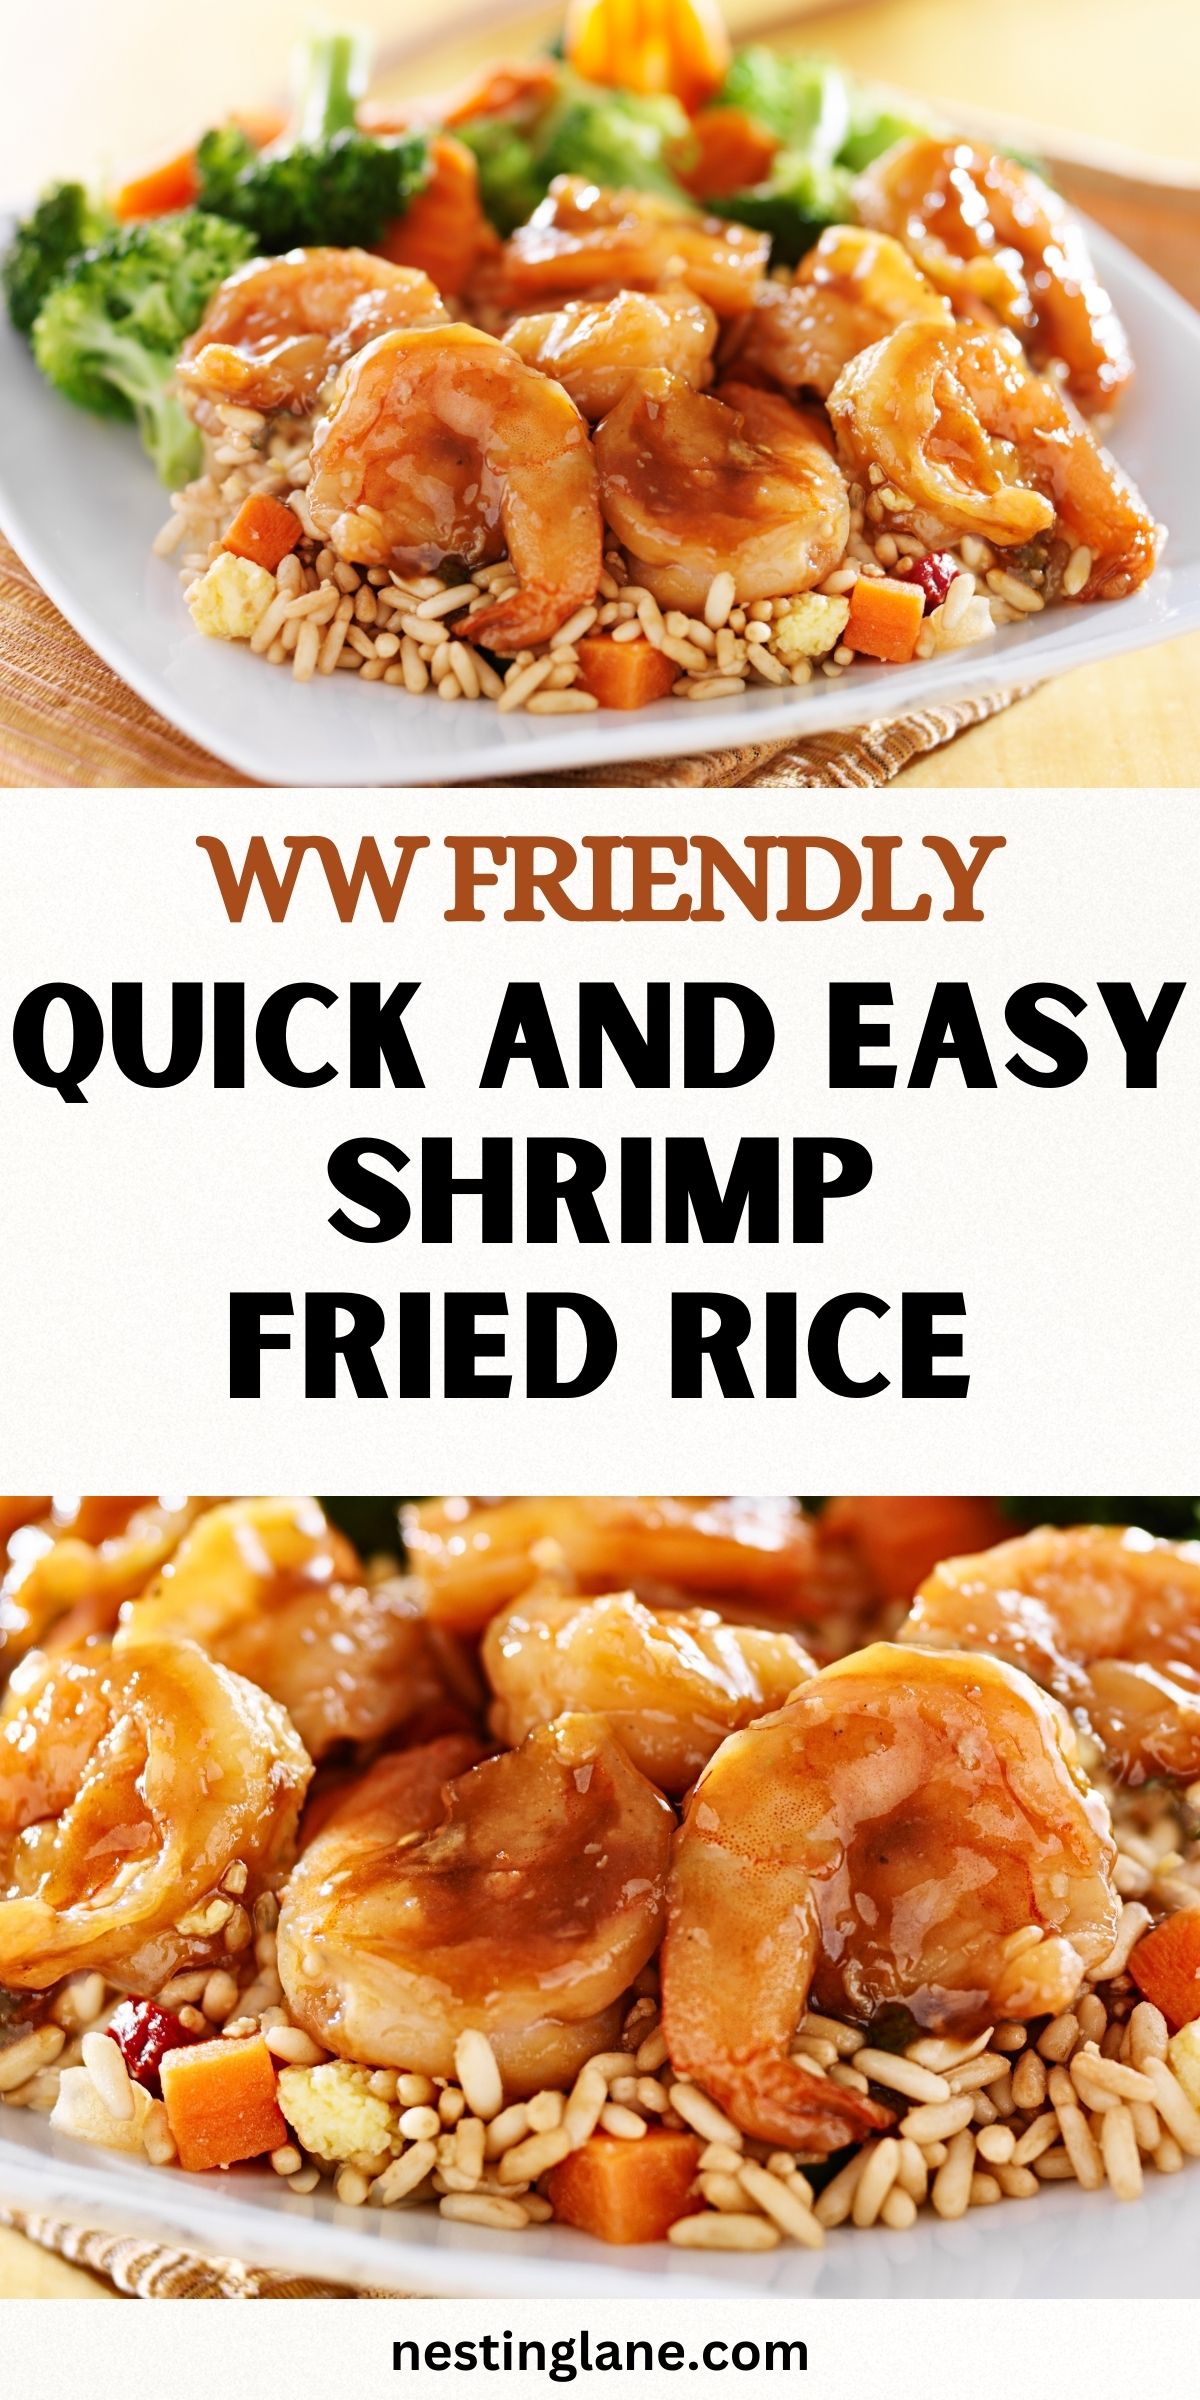 Quick And Easy Shrimp Fried Rice Graphic.